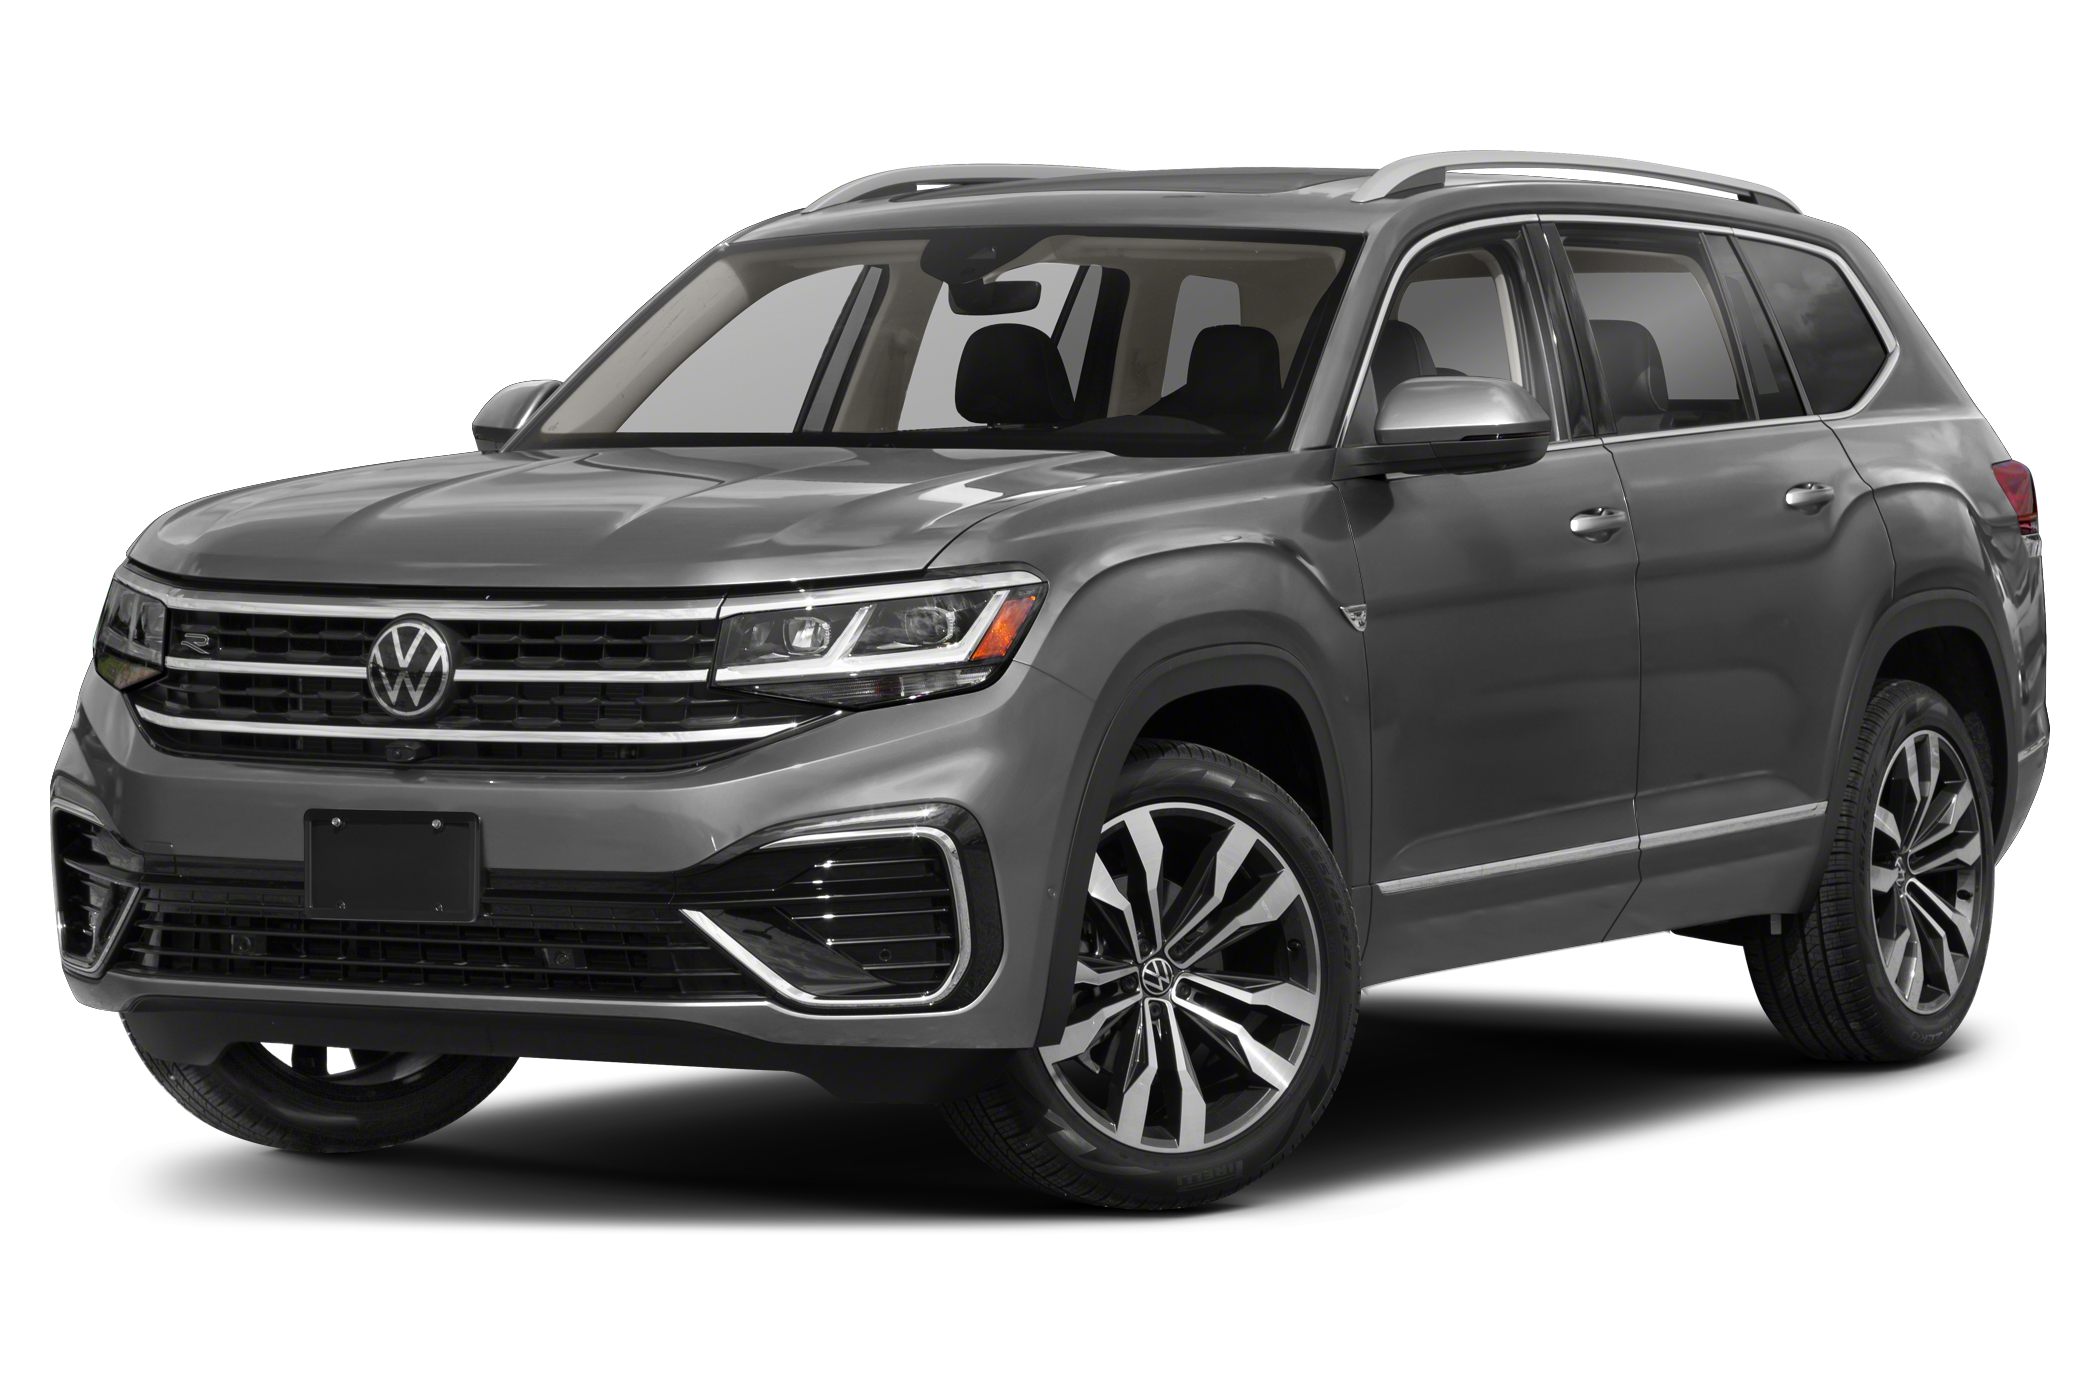 2021 Volkswagen Atlas 3 6l V6 Sel R Line 4dr All Wheel Drive 4motion Specs And Prices